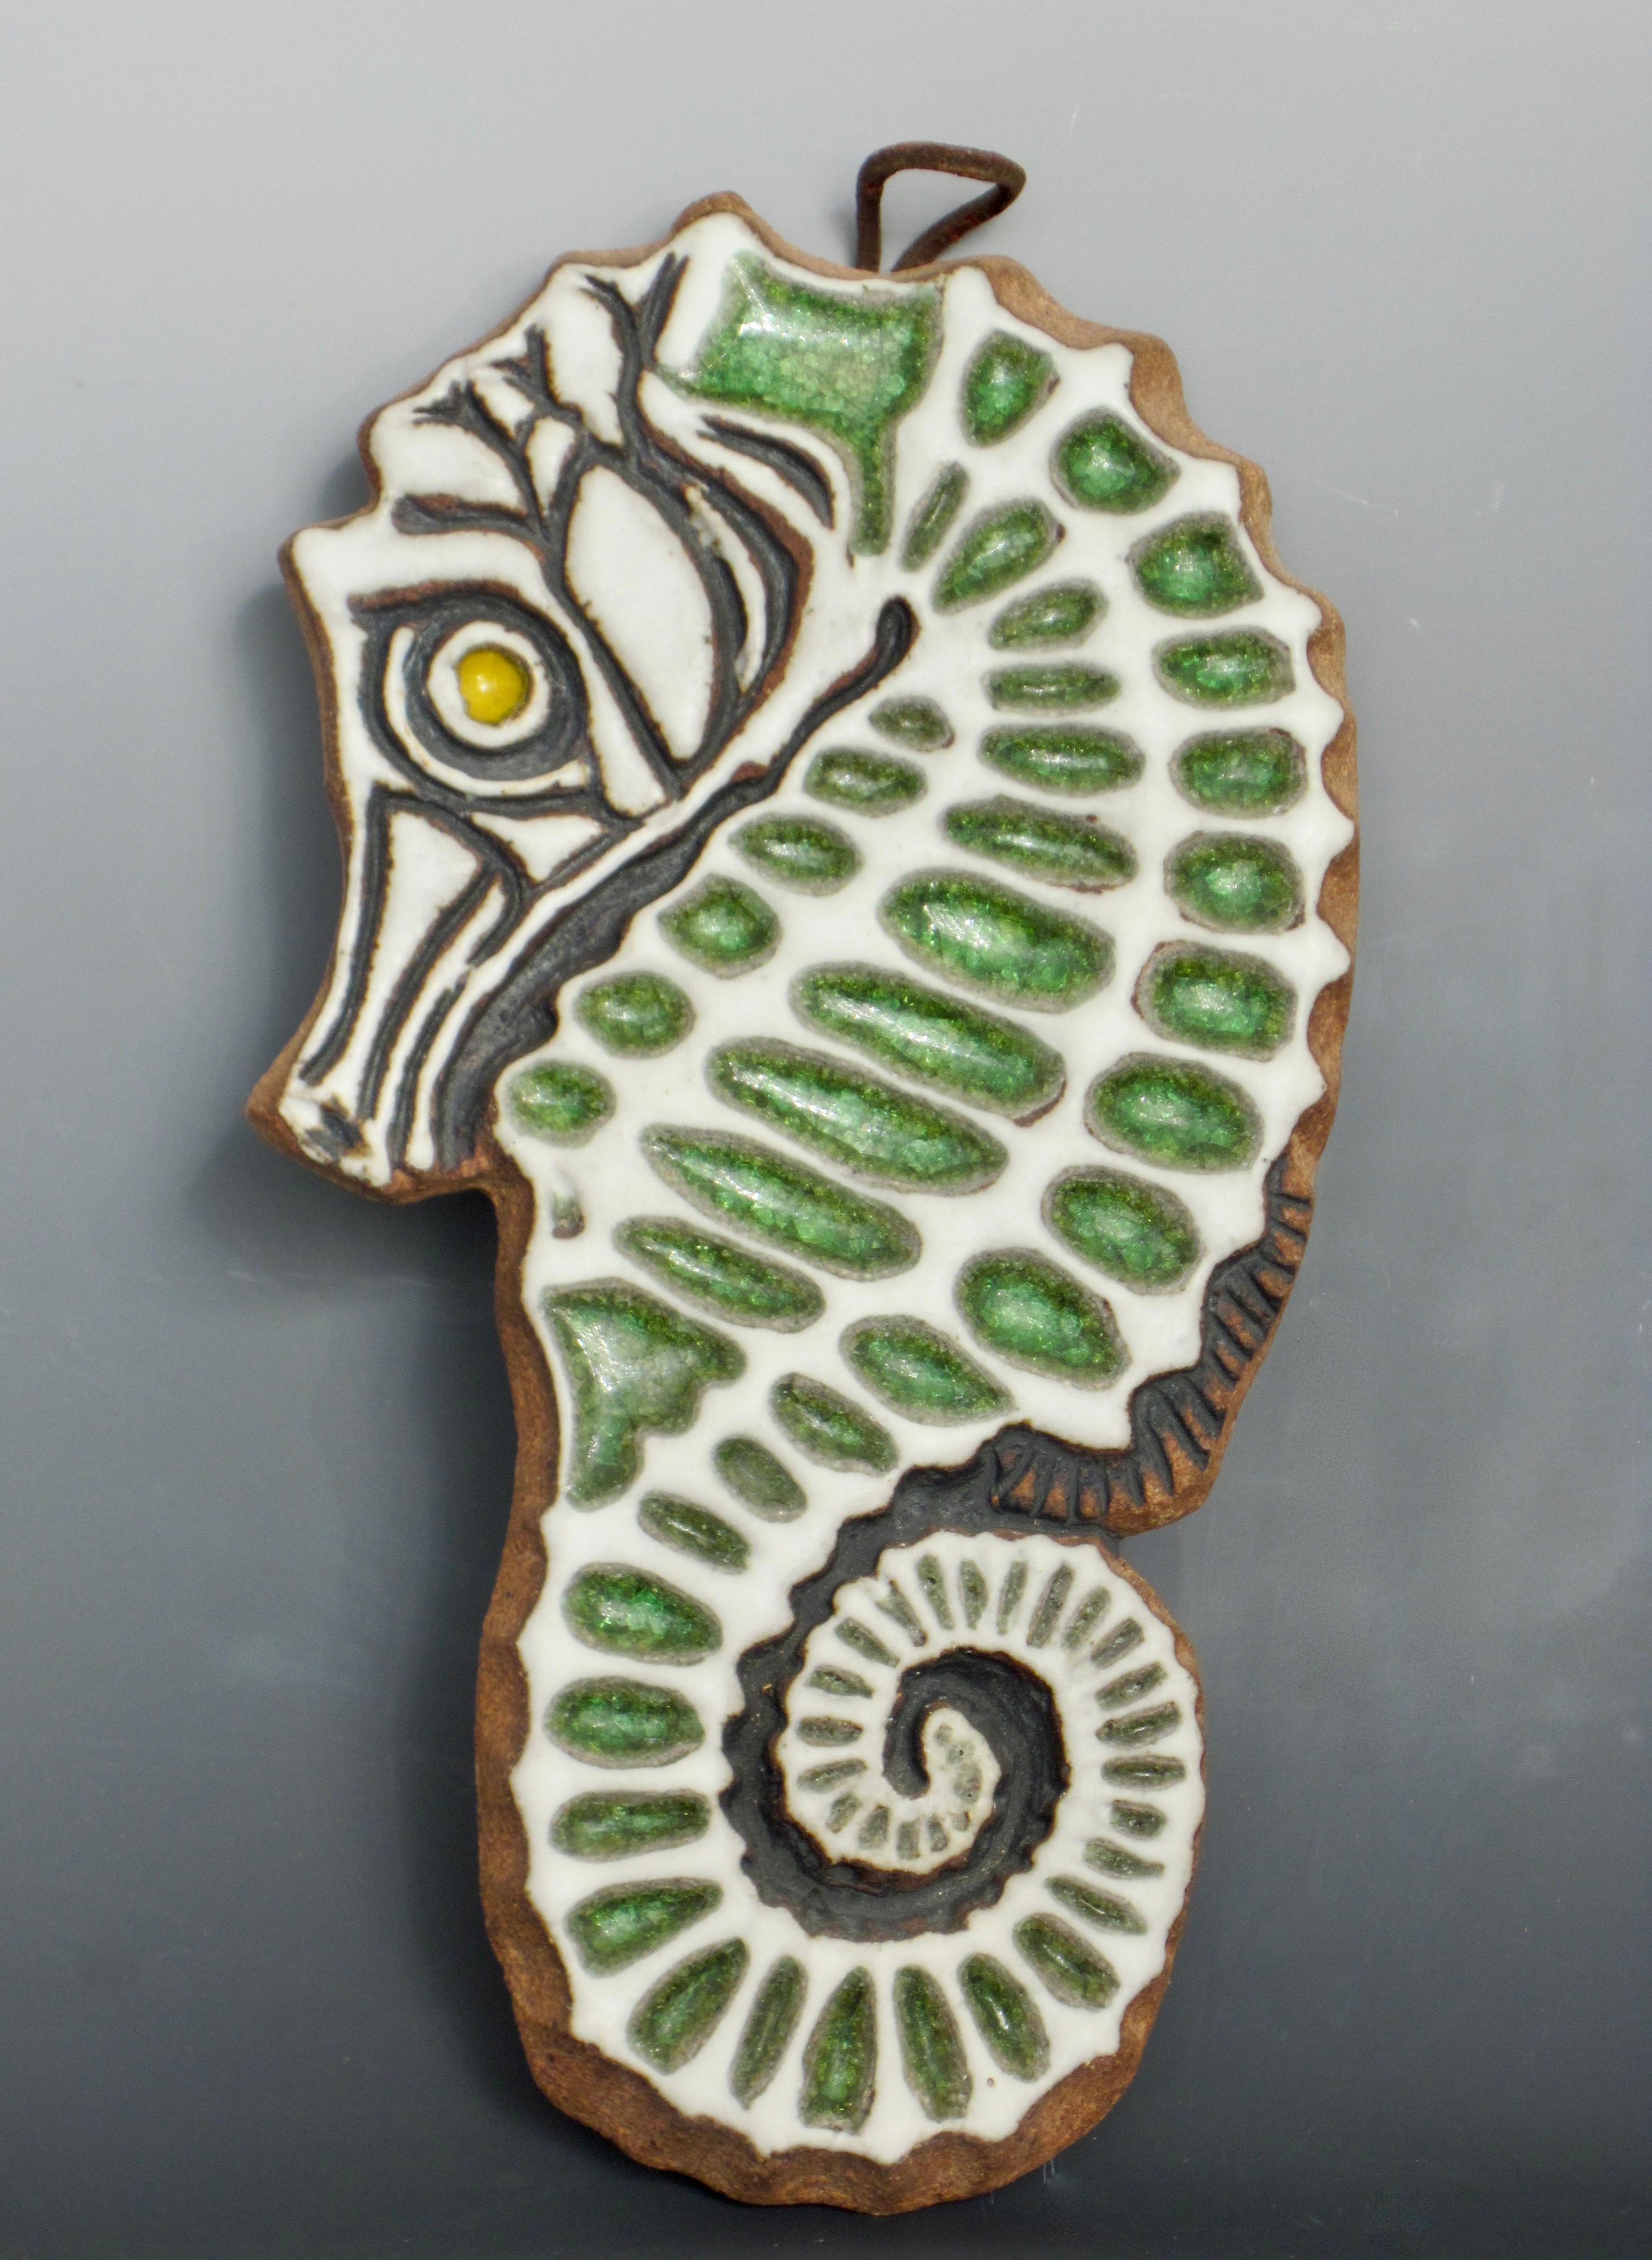 A handmade 1970s terra cotta earthenware seahorse sculpture created by California studio potter Victoria Littlejohn. An early and uncommon piece from the artist. Cork backing with leather loop for wall hanging. Very good vintage condition.